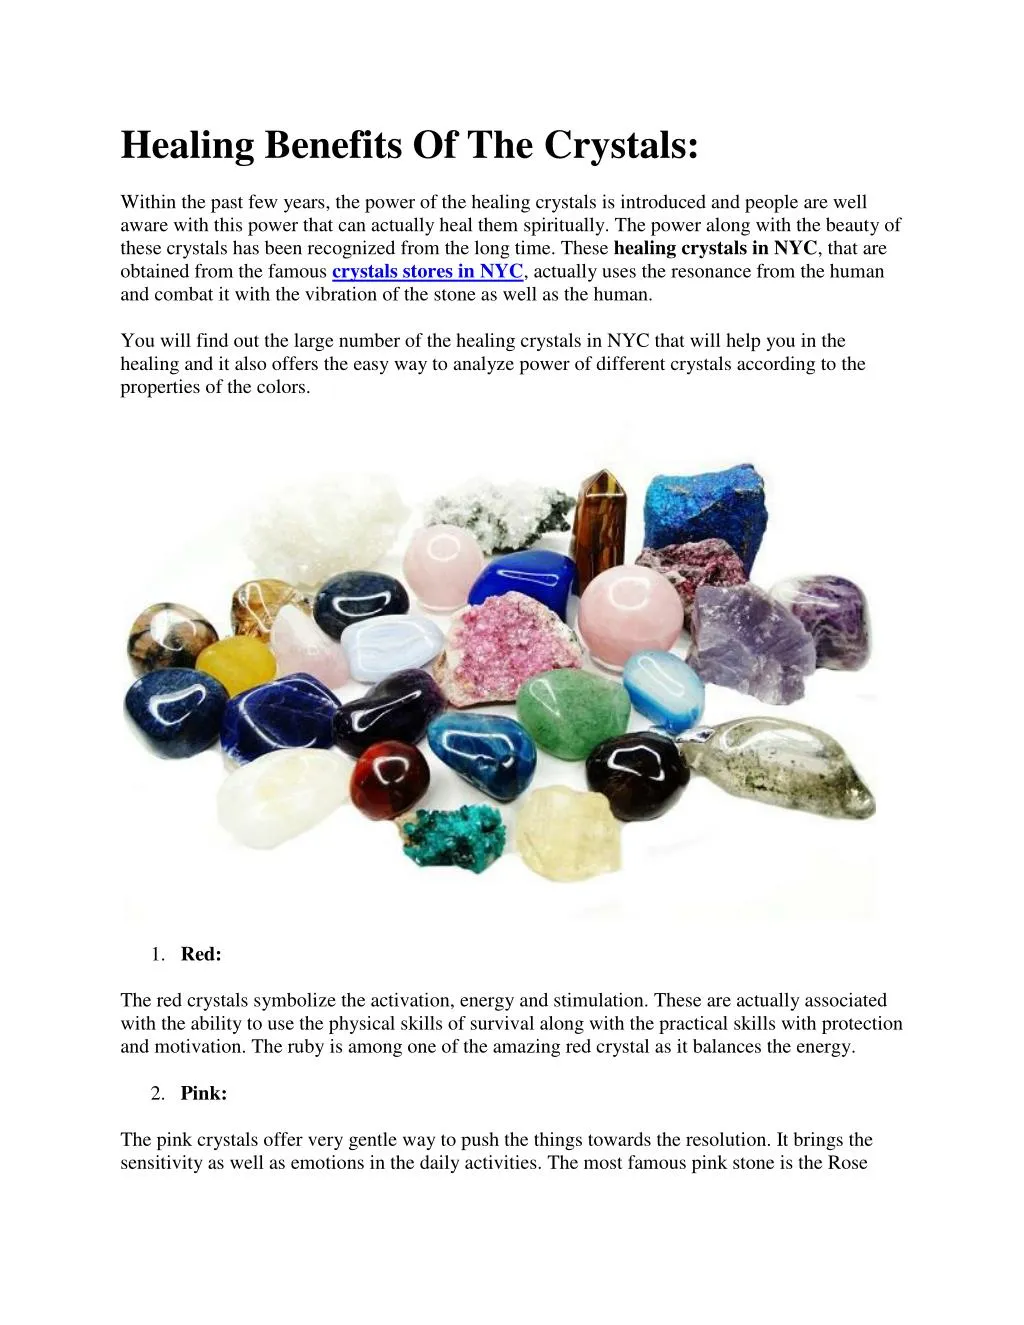 PPT - Healing Benefits Of The Crystals: PowerPoint Presentation, free